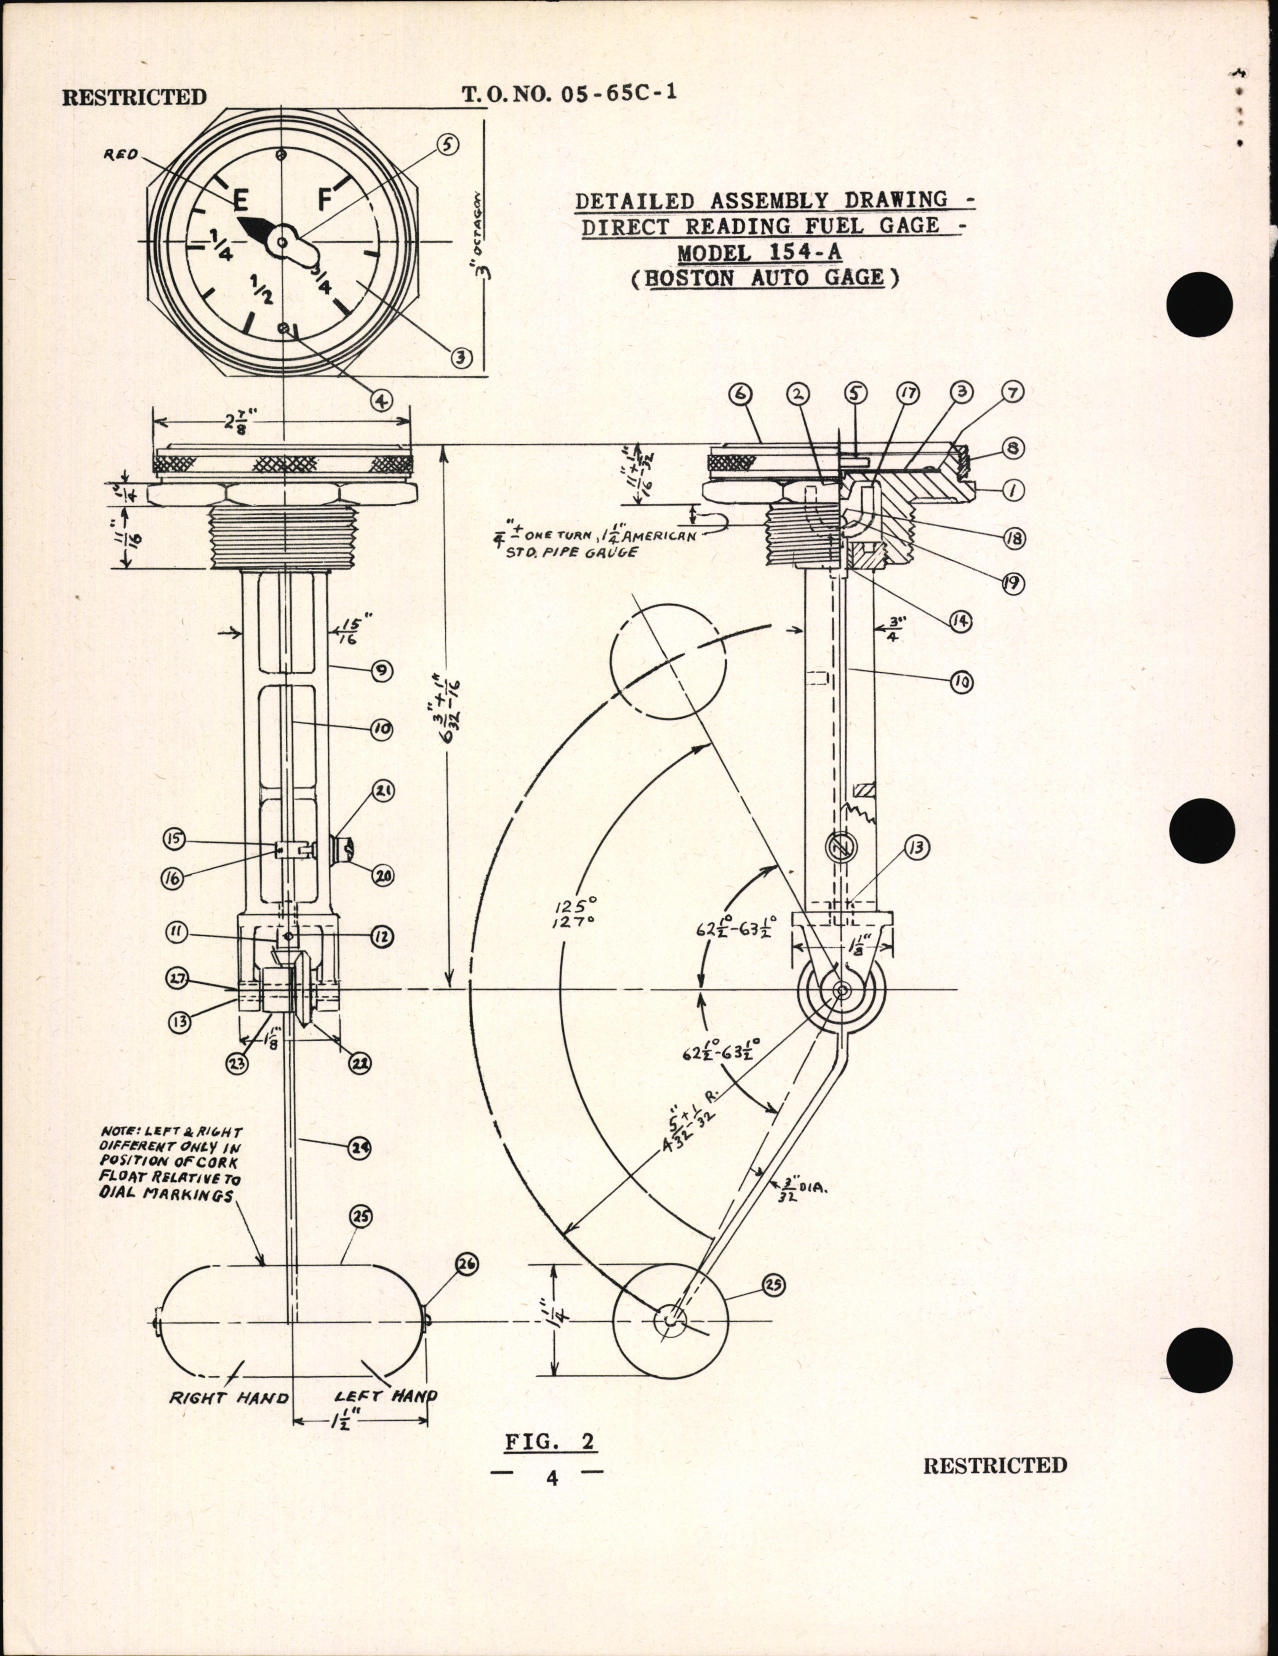 Sample page 6 from AirCorps Library document: Handbook of Instructions with Assembly Parts List for Direct Reading Fuel Gage Model 154-A